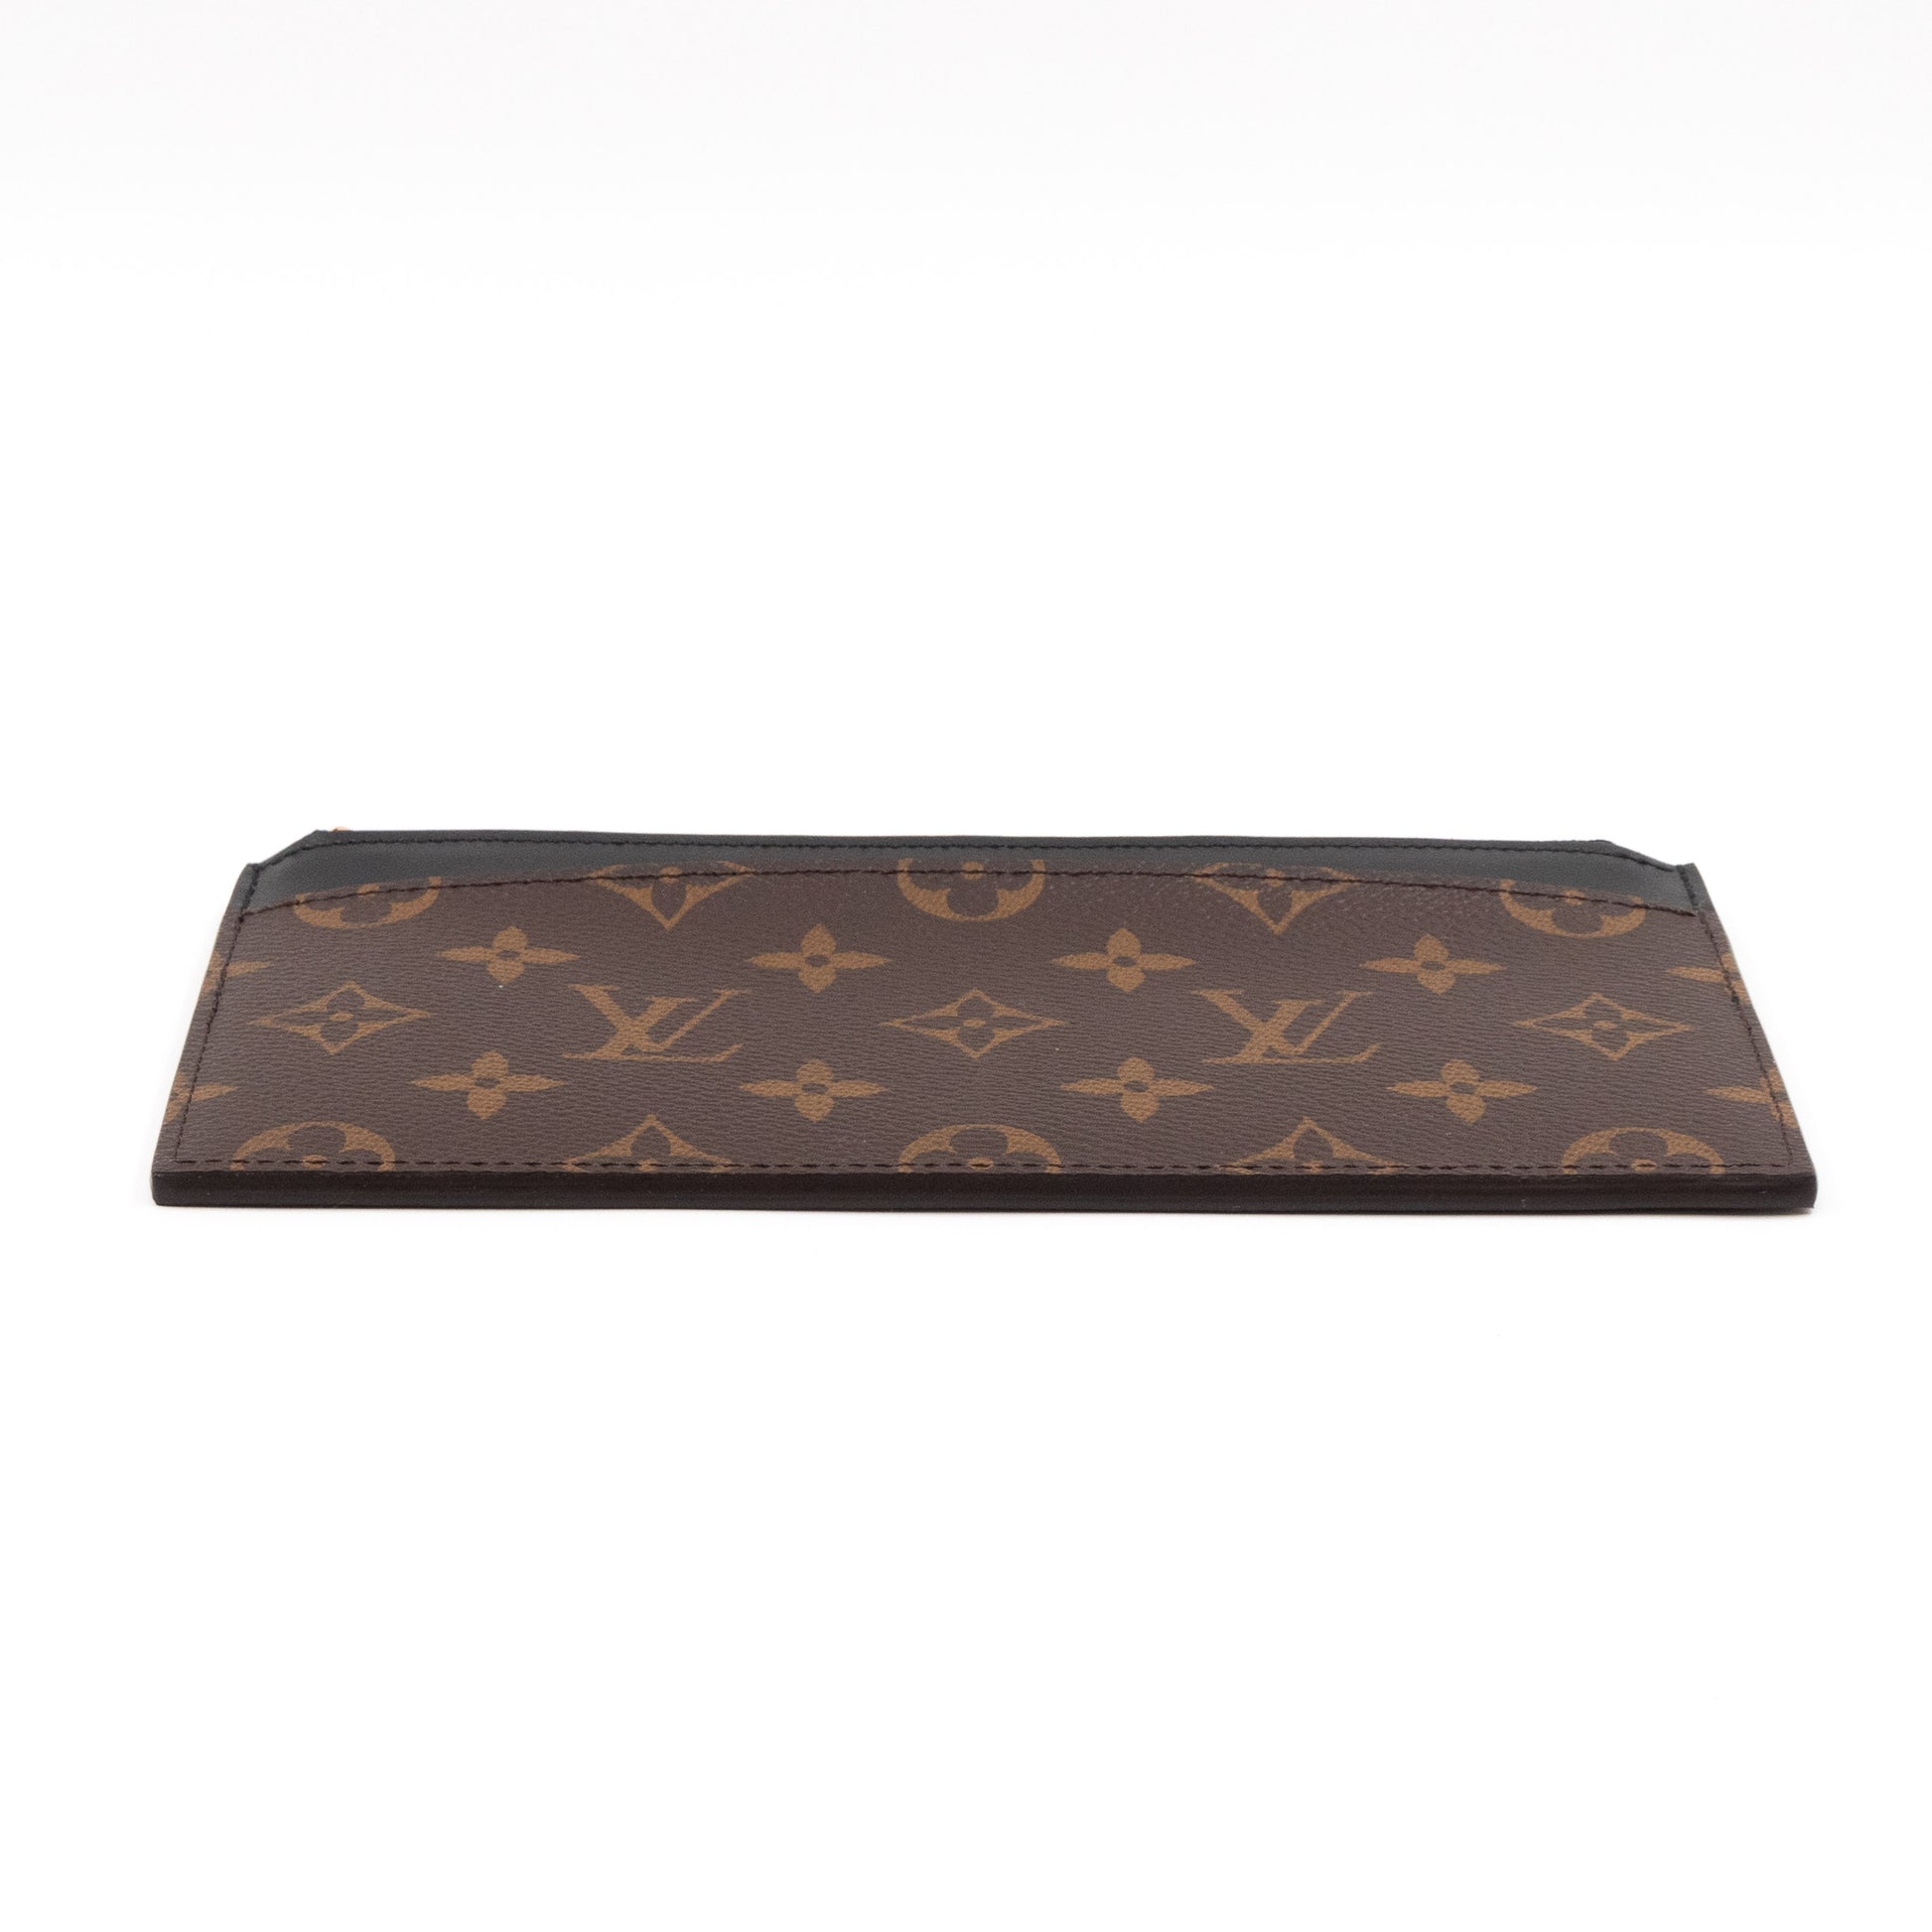 Louis Vuitton Slim Purse review/What fits inside & is it worth it